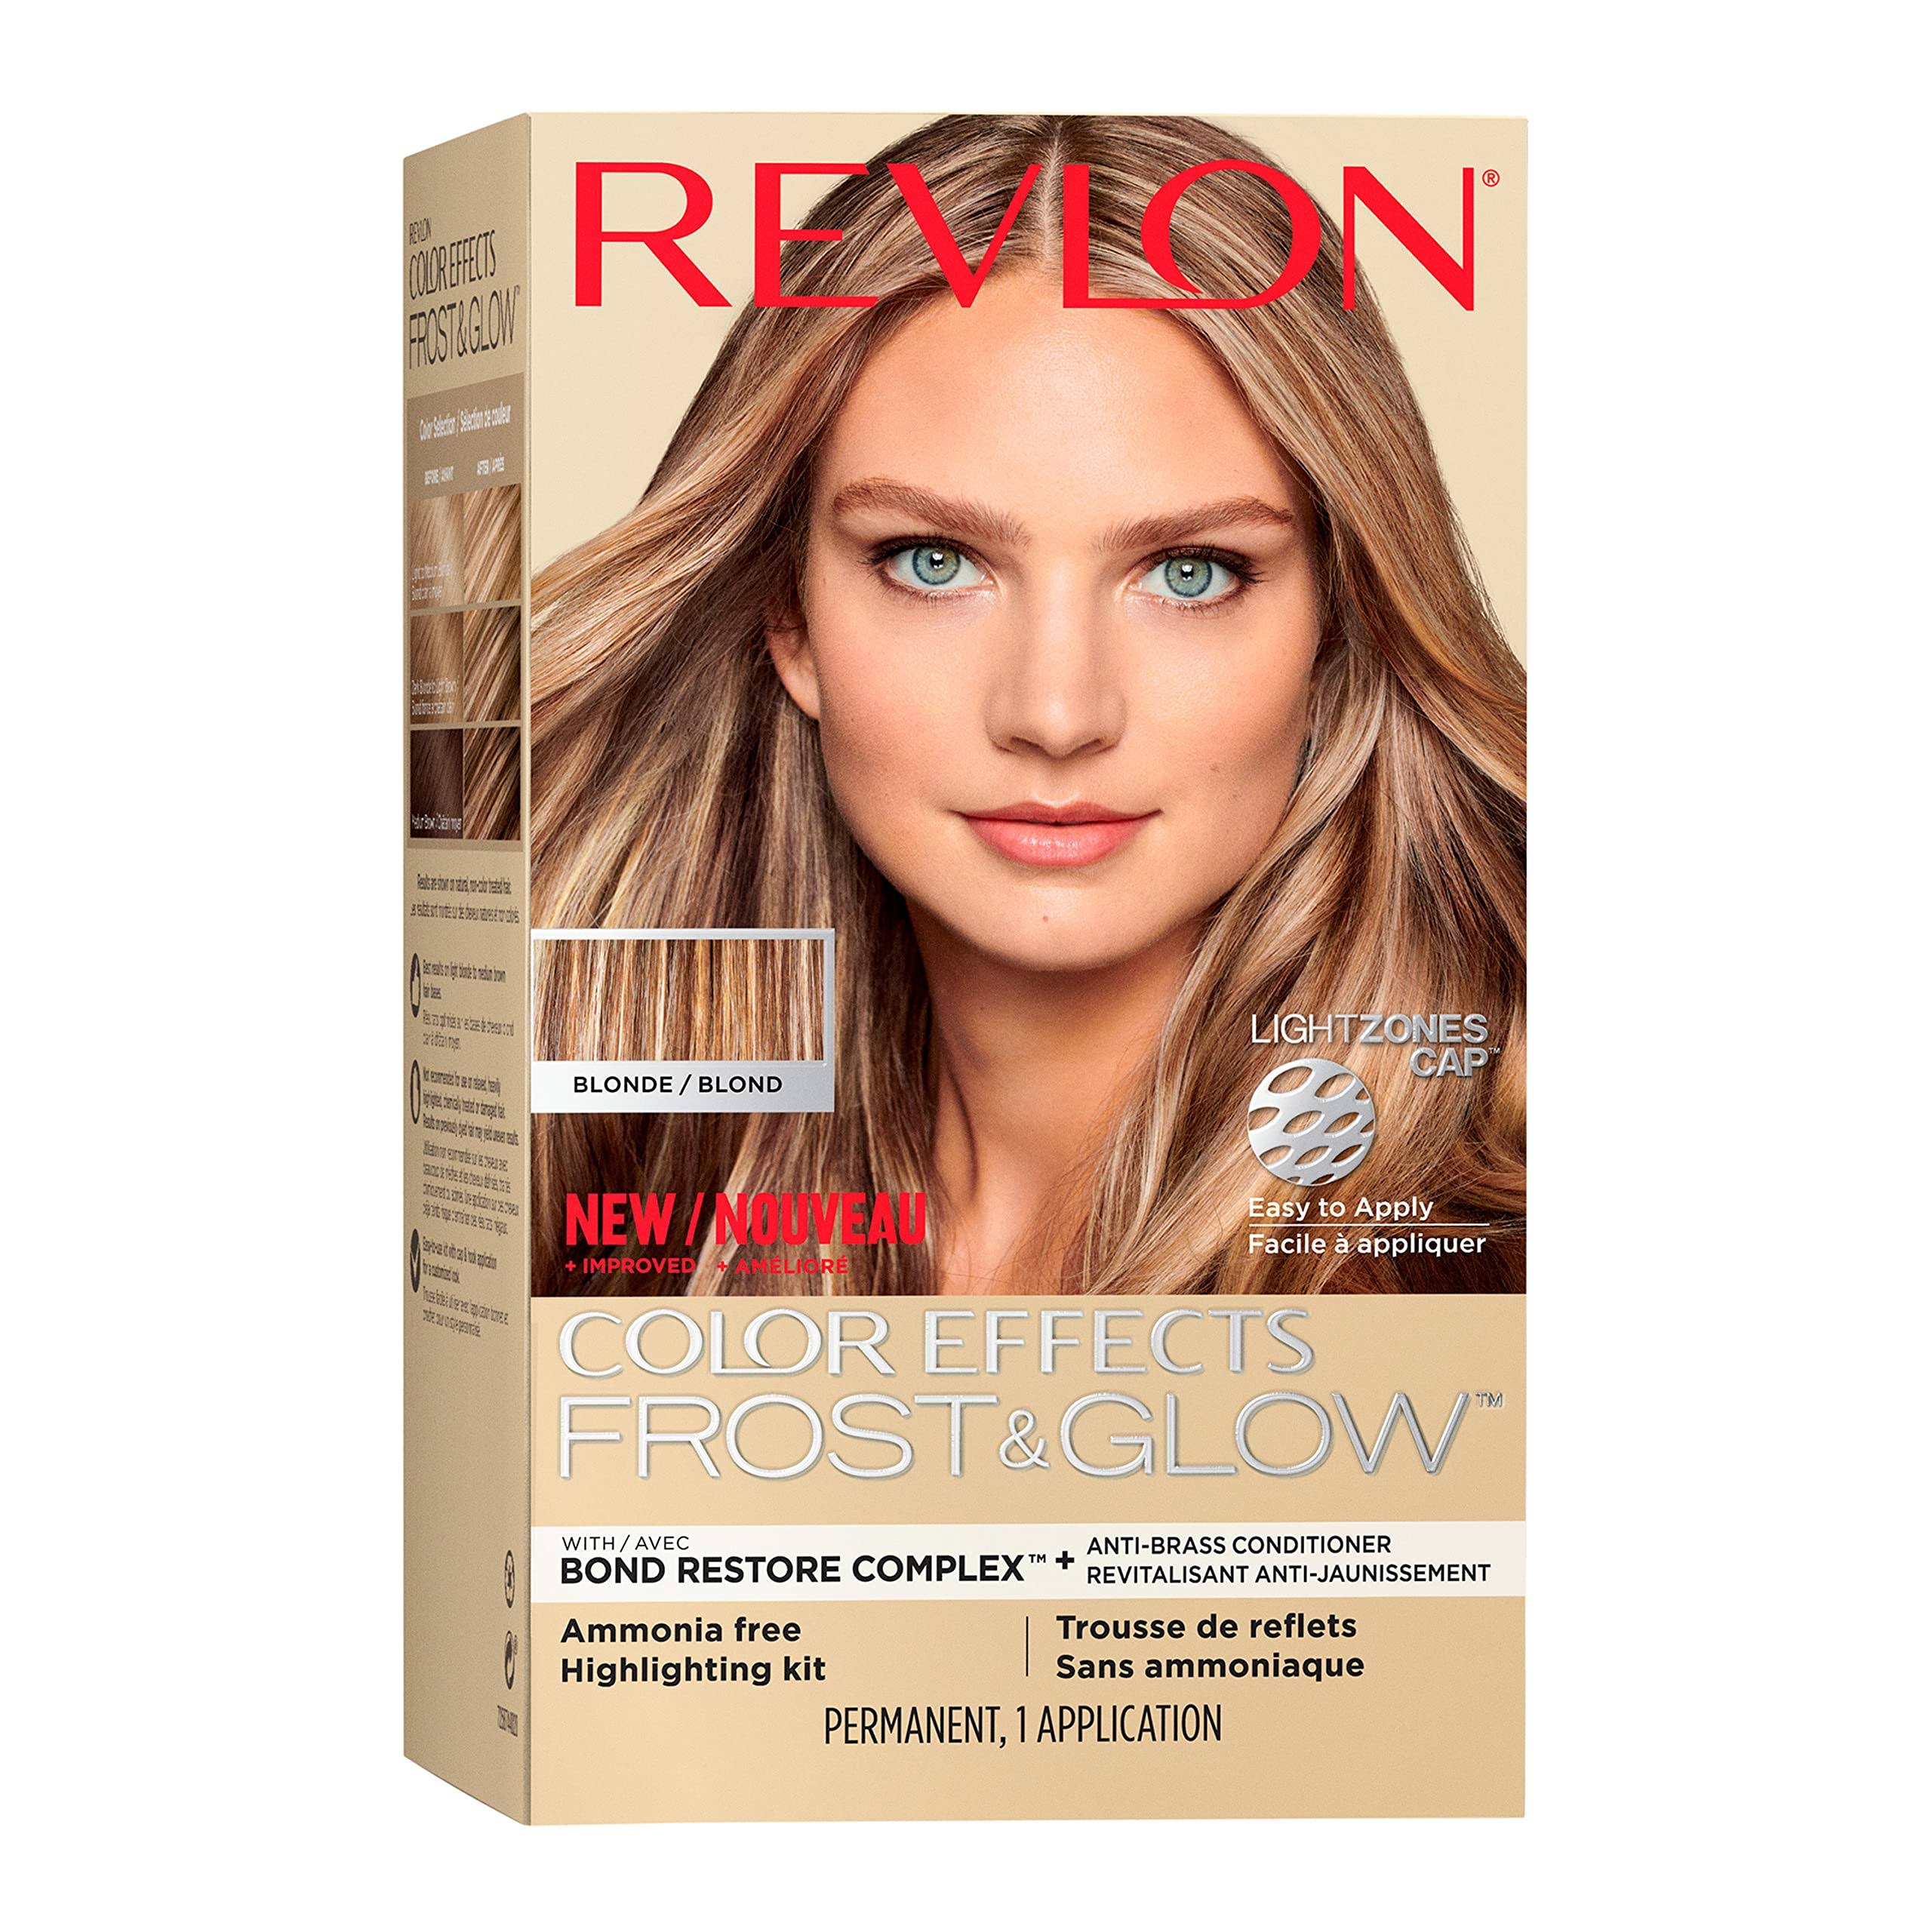 Revlon Color Effects Frost and Glow Hair Highlighting Kit - Blonde